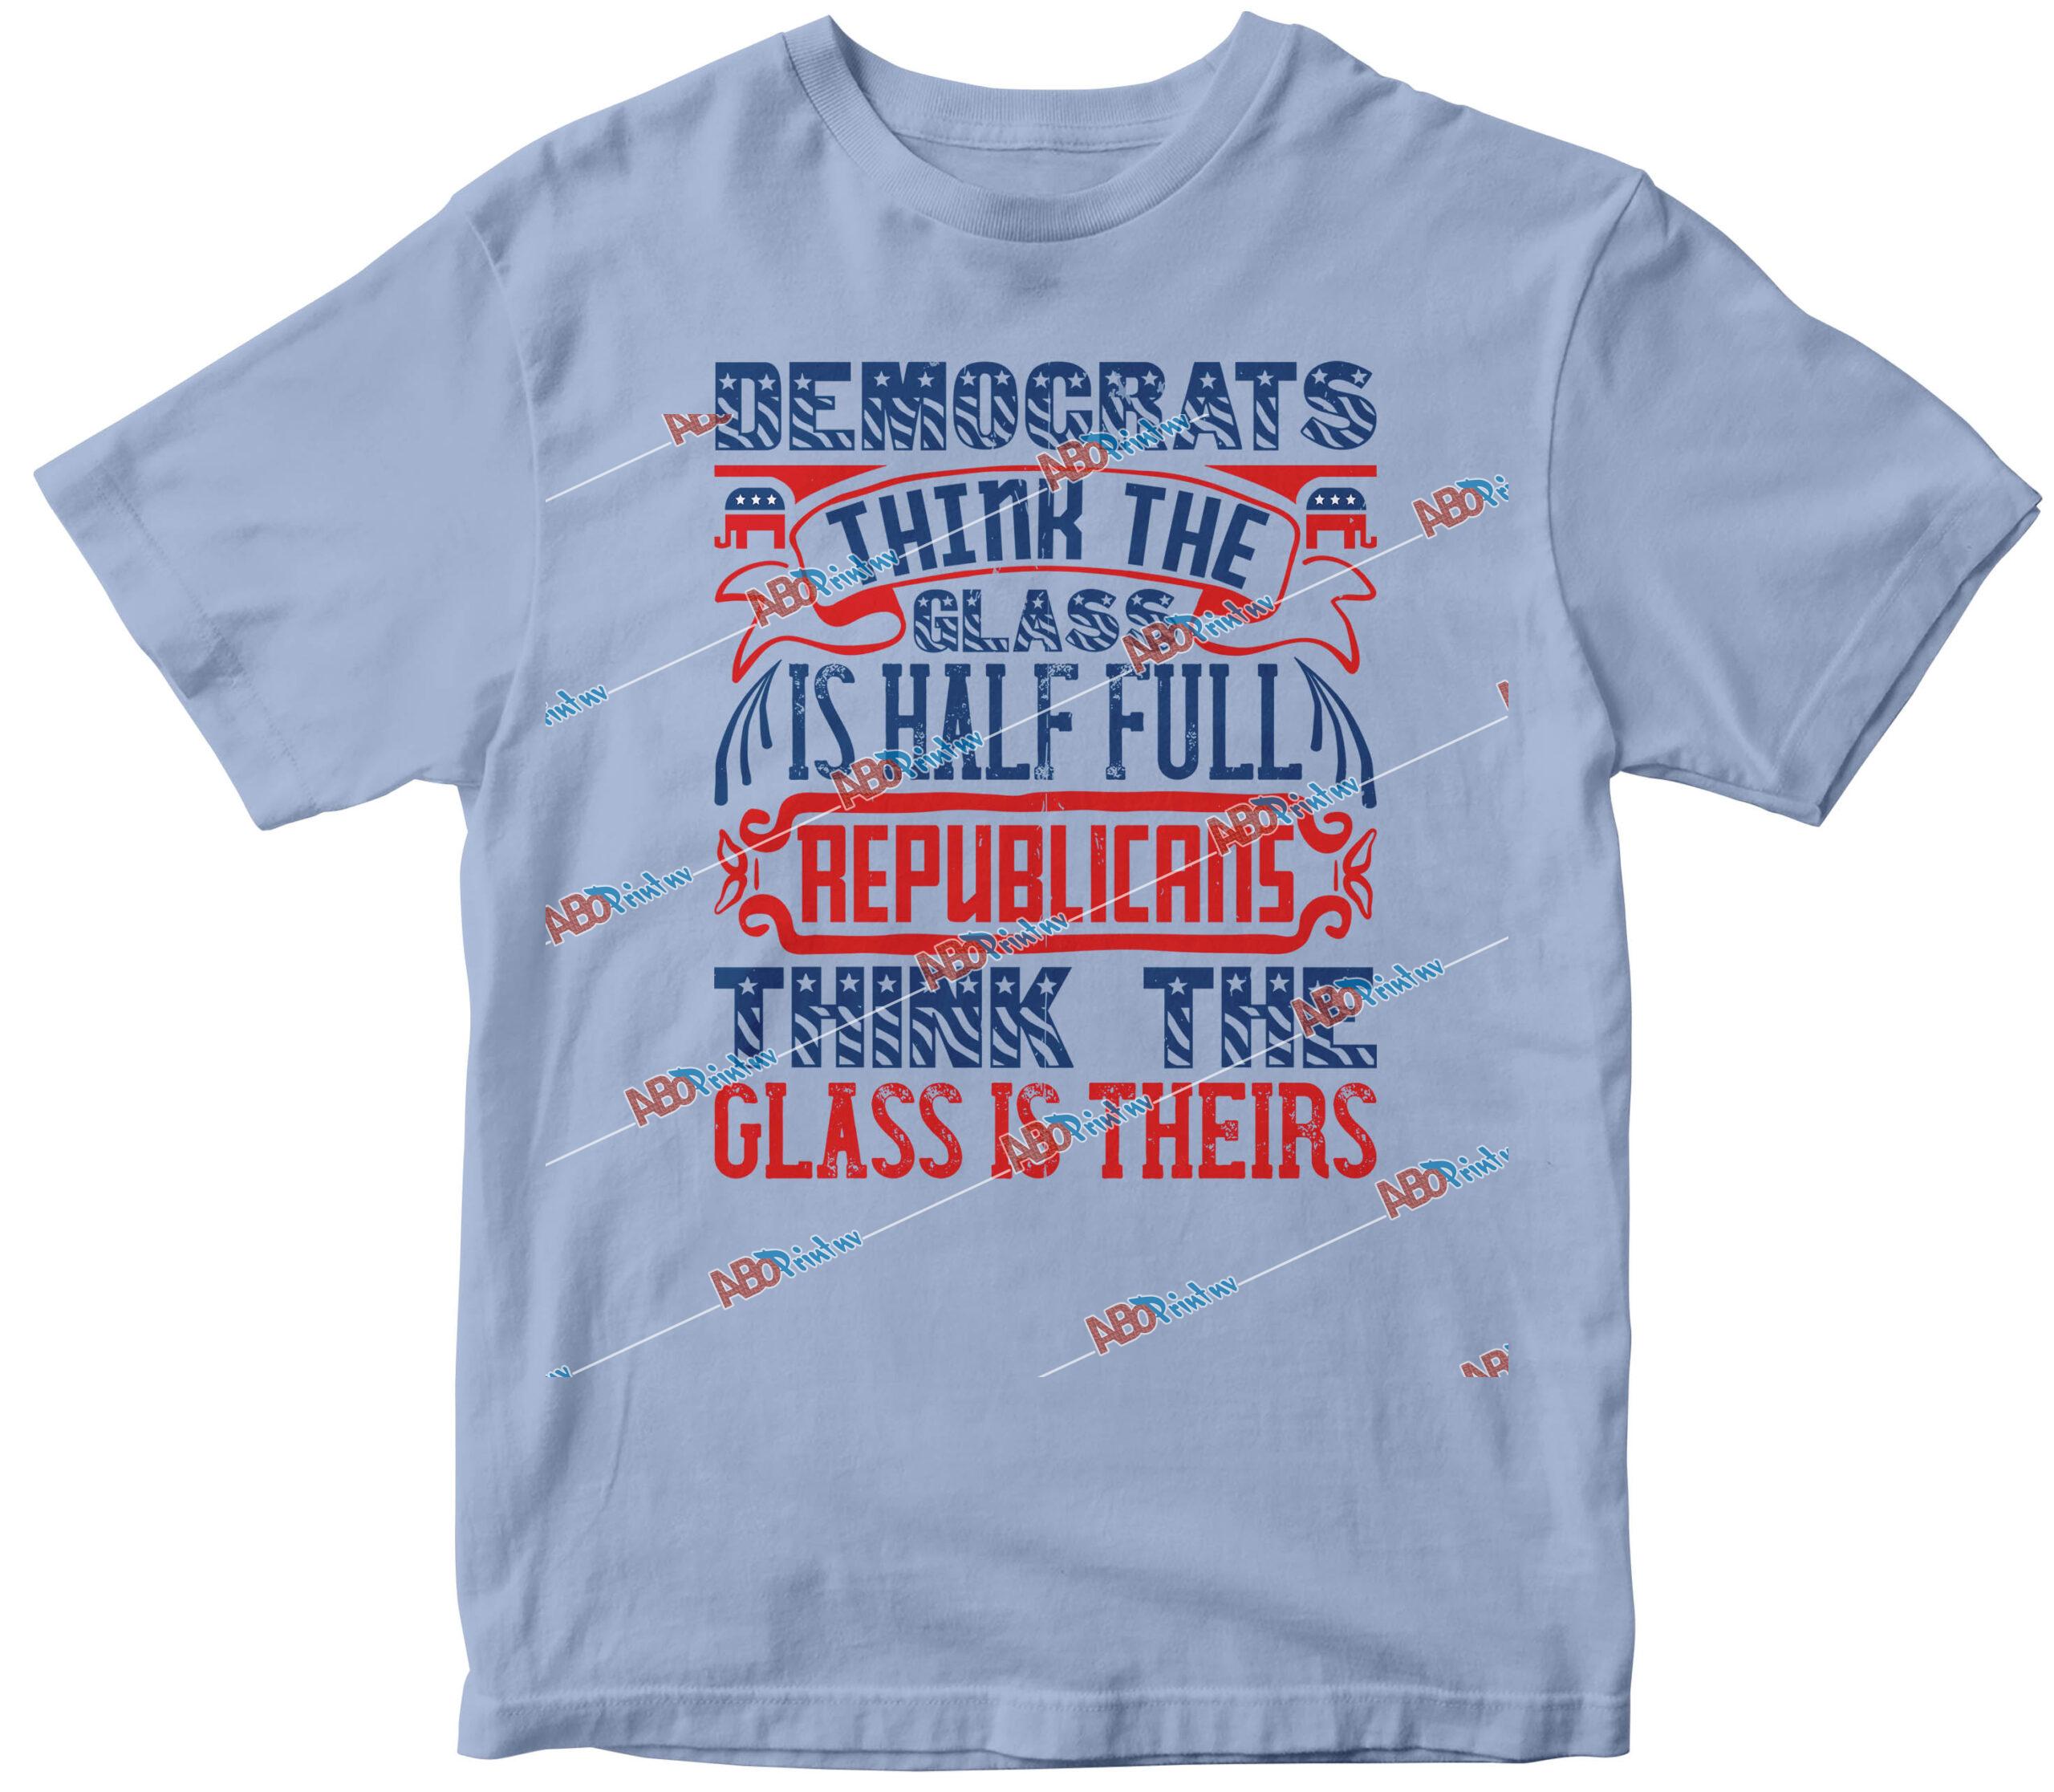 Democrats think the glass is half full. Republicans think the glass is theirs.jpg